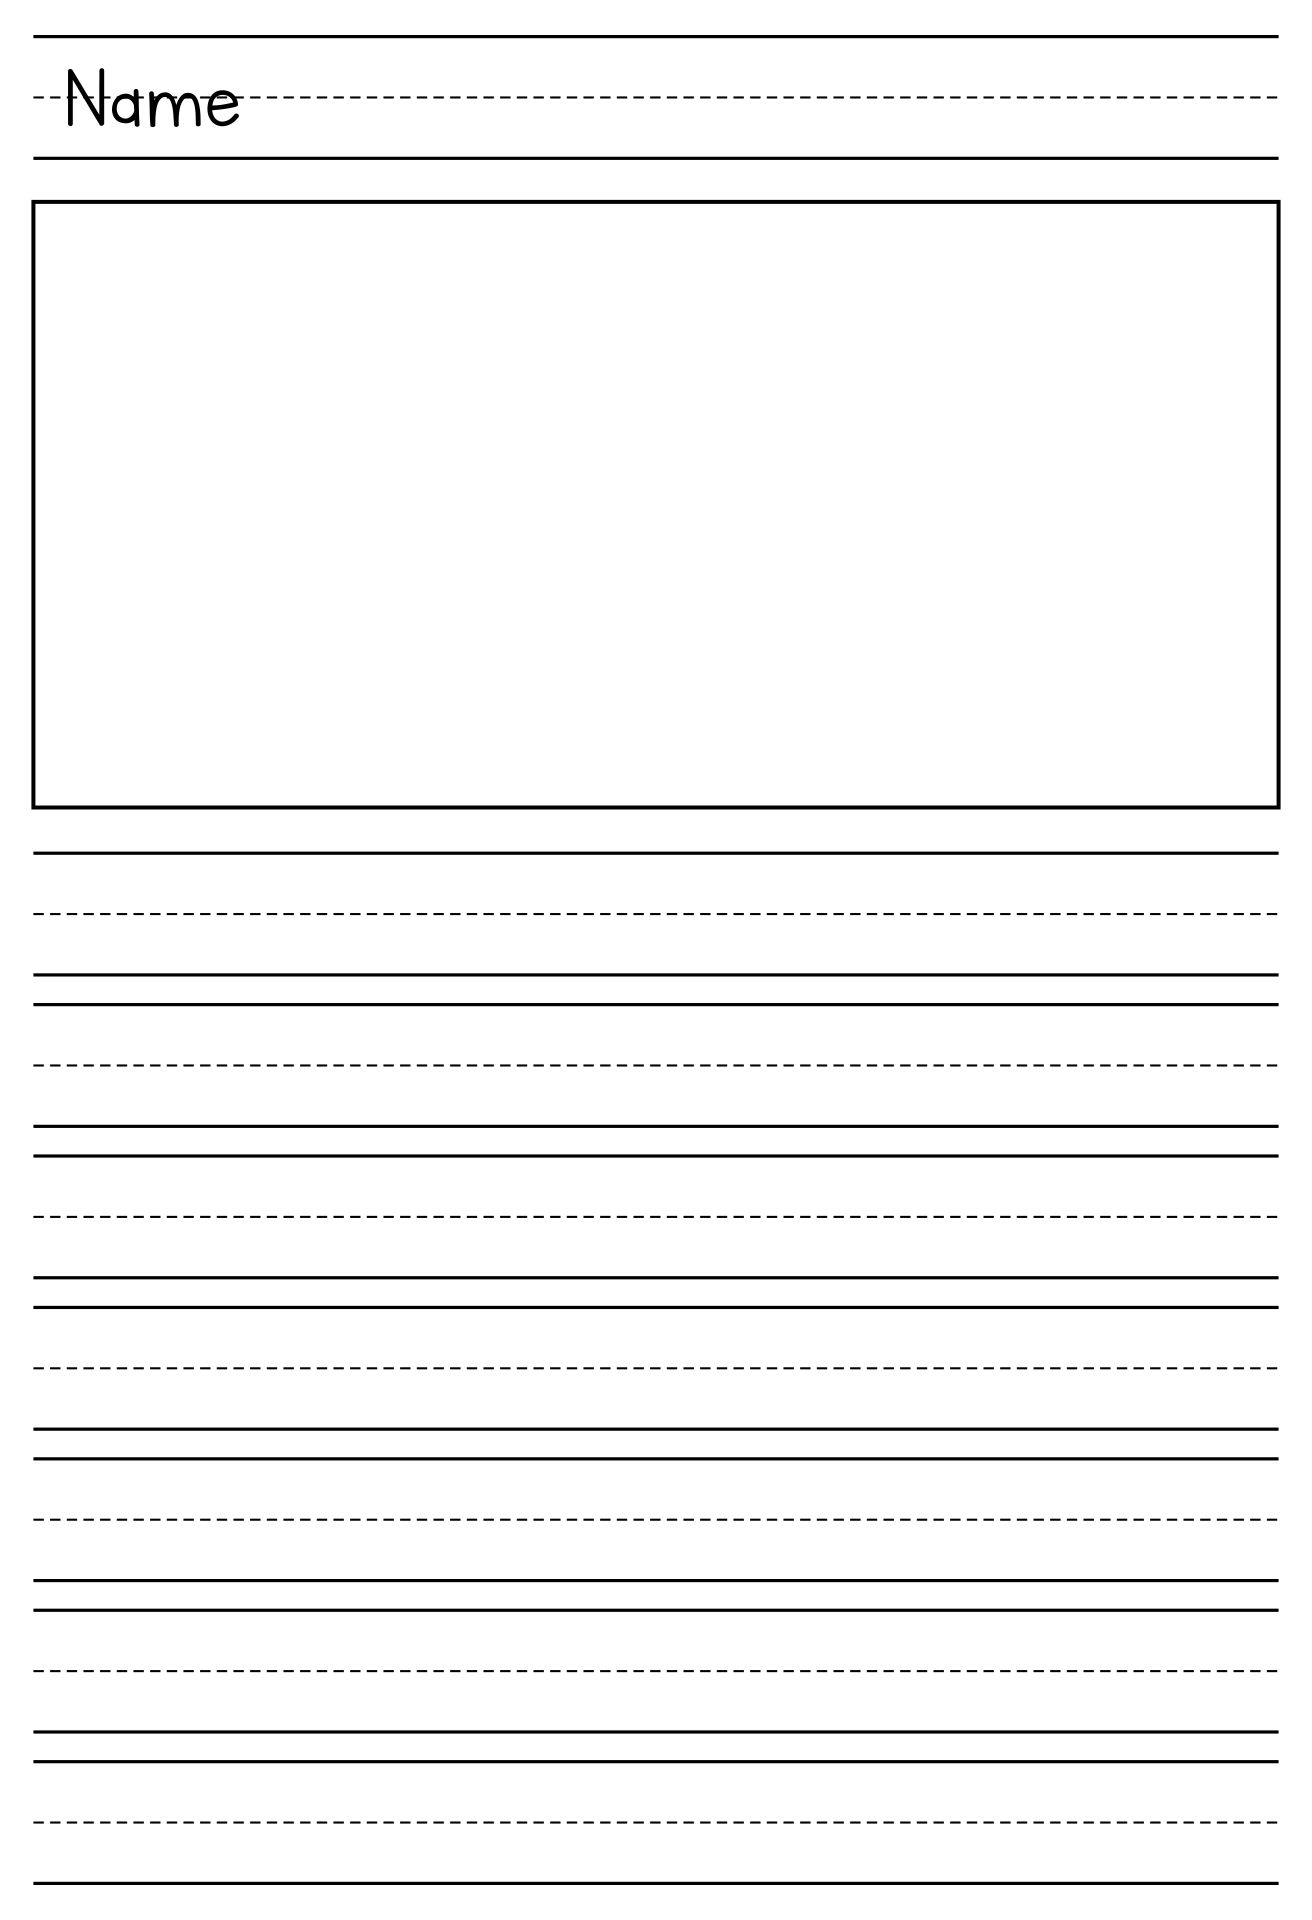 writing-template-with-picture-box